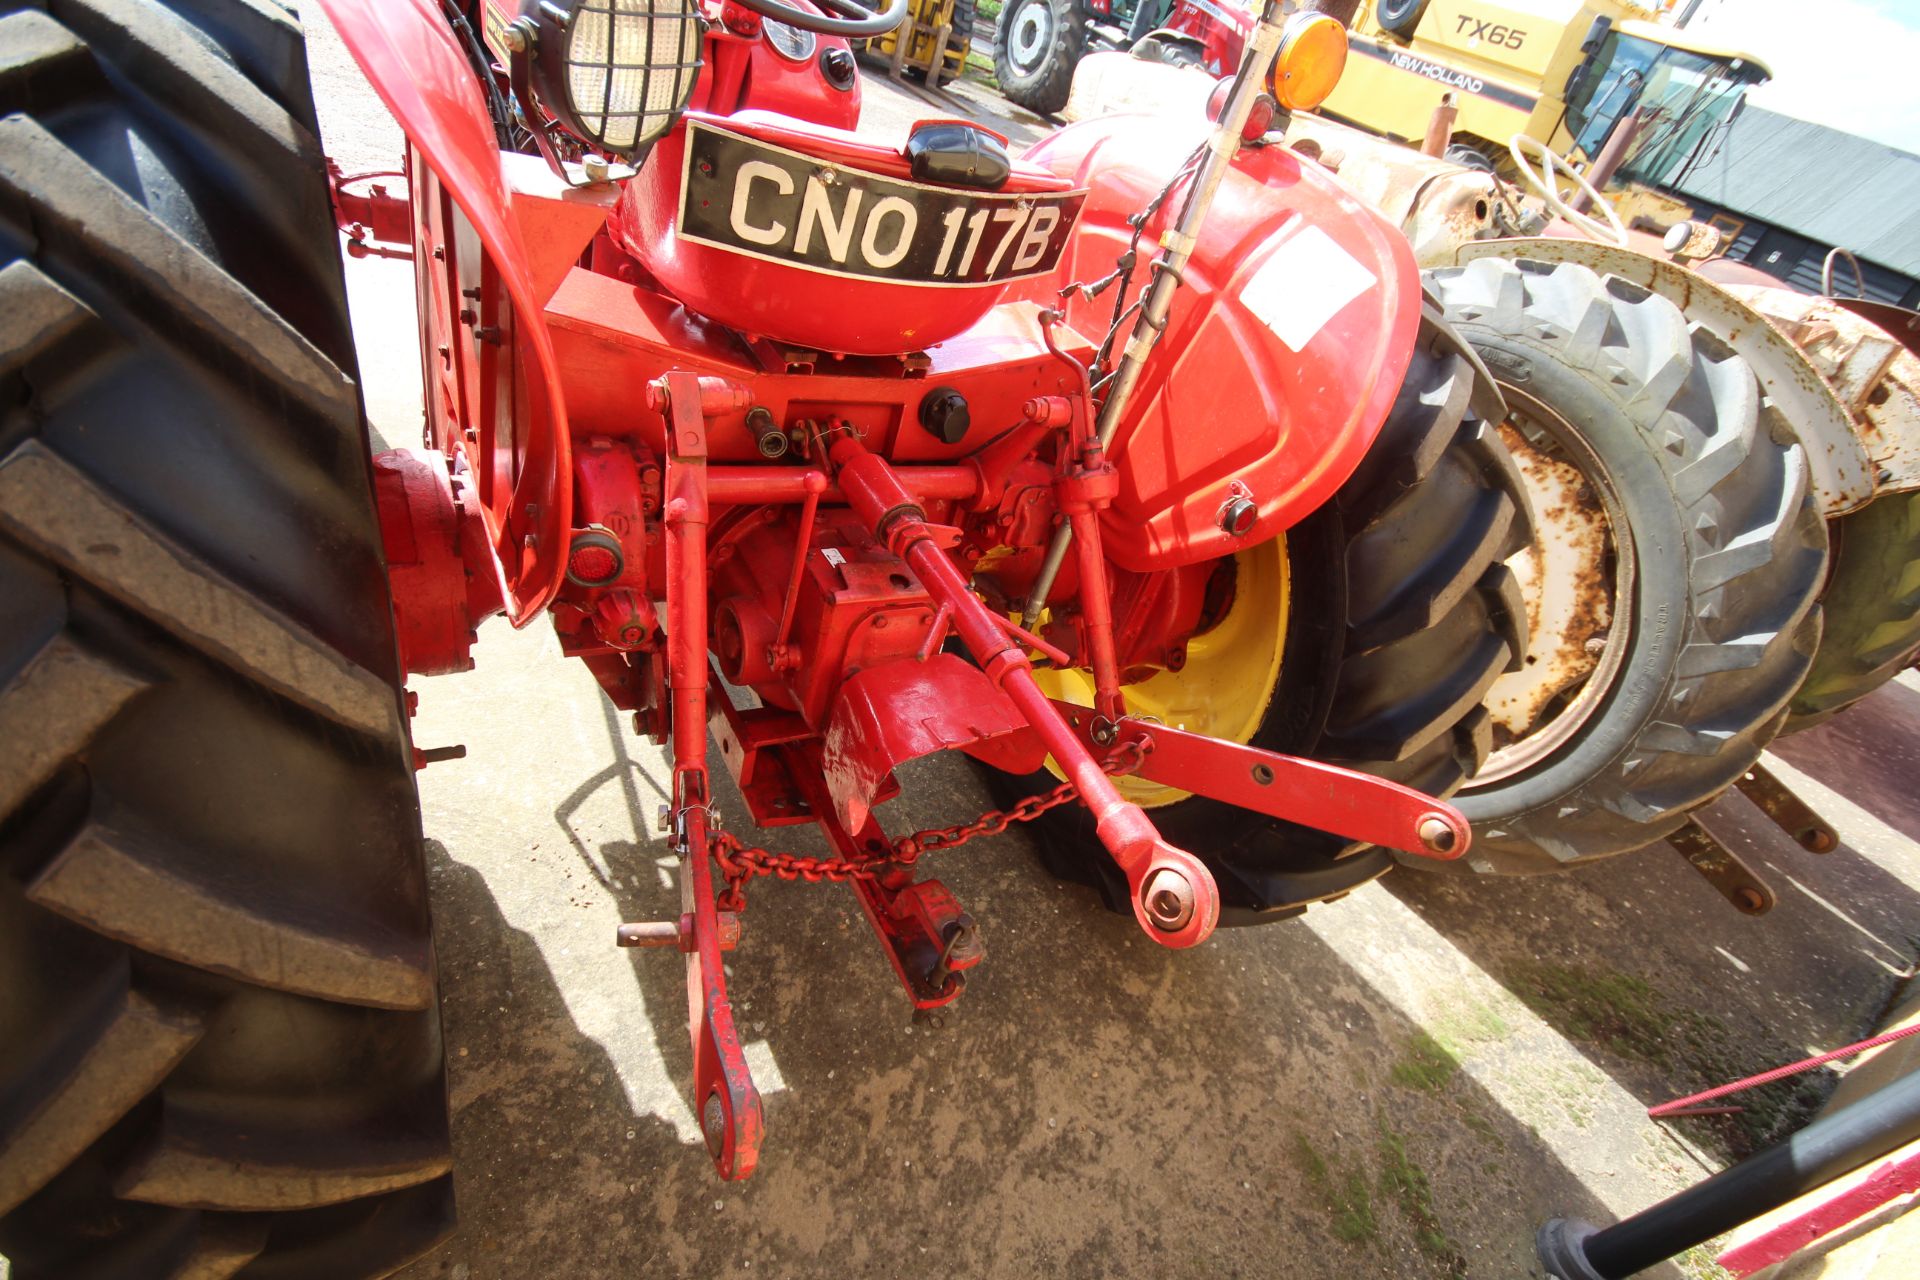 David Brown 990 Implematic live drive 2WD tractor. Registration CNO 117B. Date of first registration - Image 19 of 43